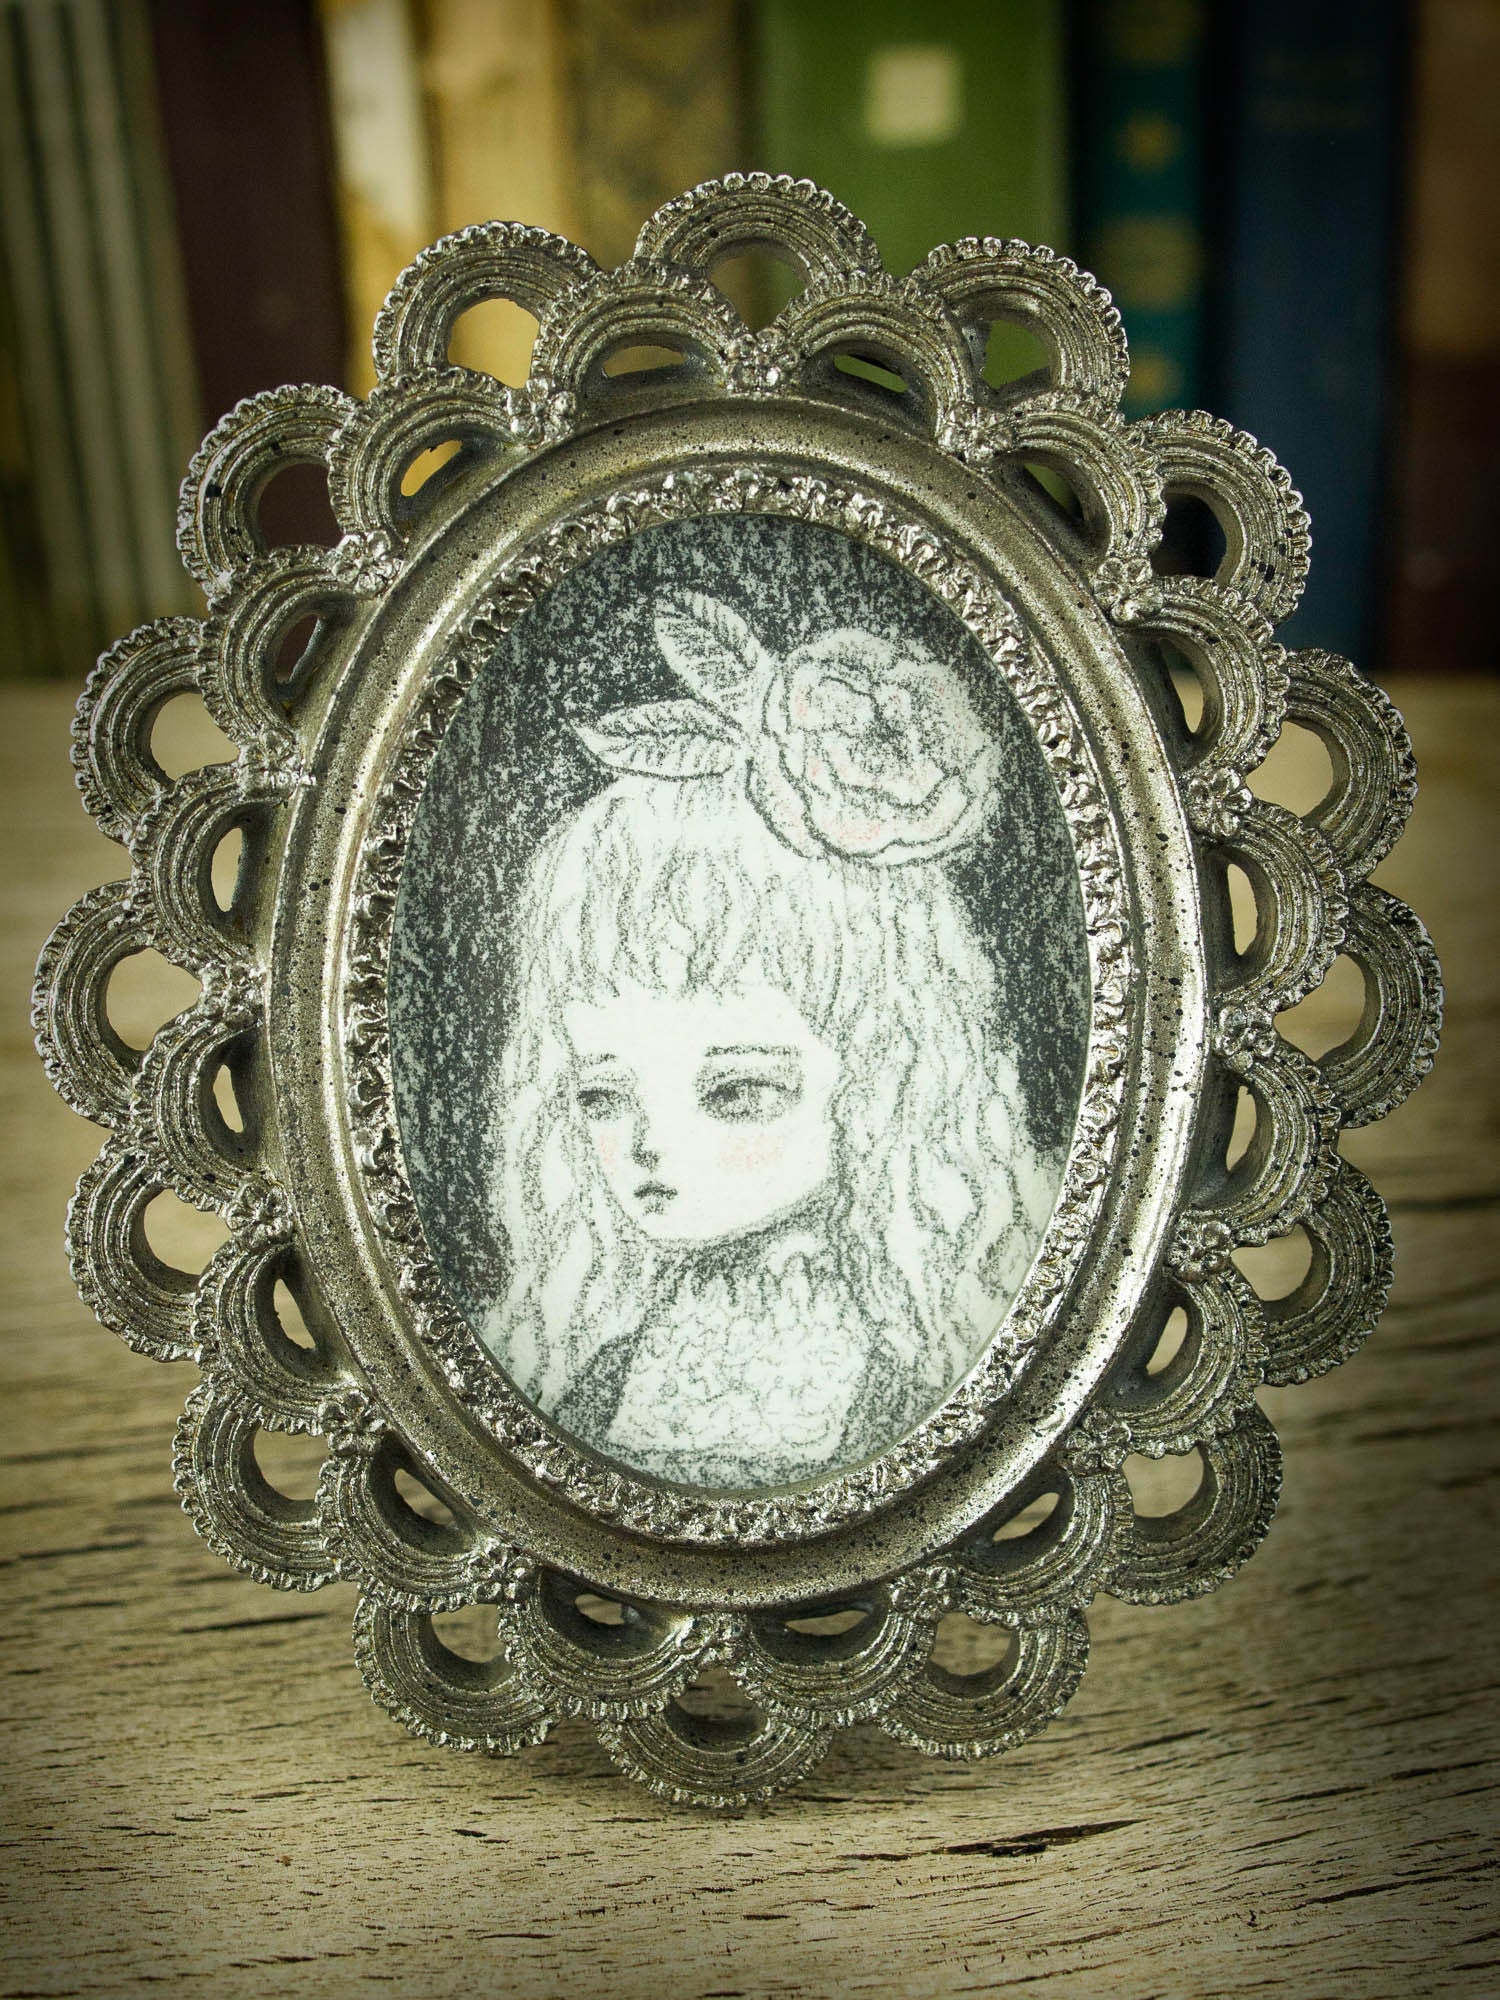 This is a very simple drawing in pencil by Danita Art, with just a little bit of rouge red on her cheeks. I love the vintage style of the image, and the little frame that comes with it it's just perfect for her.